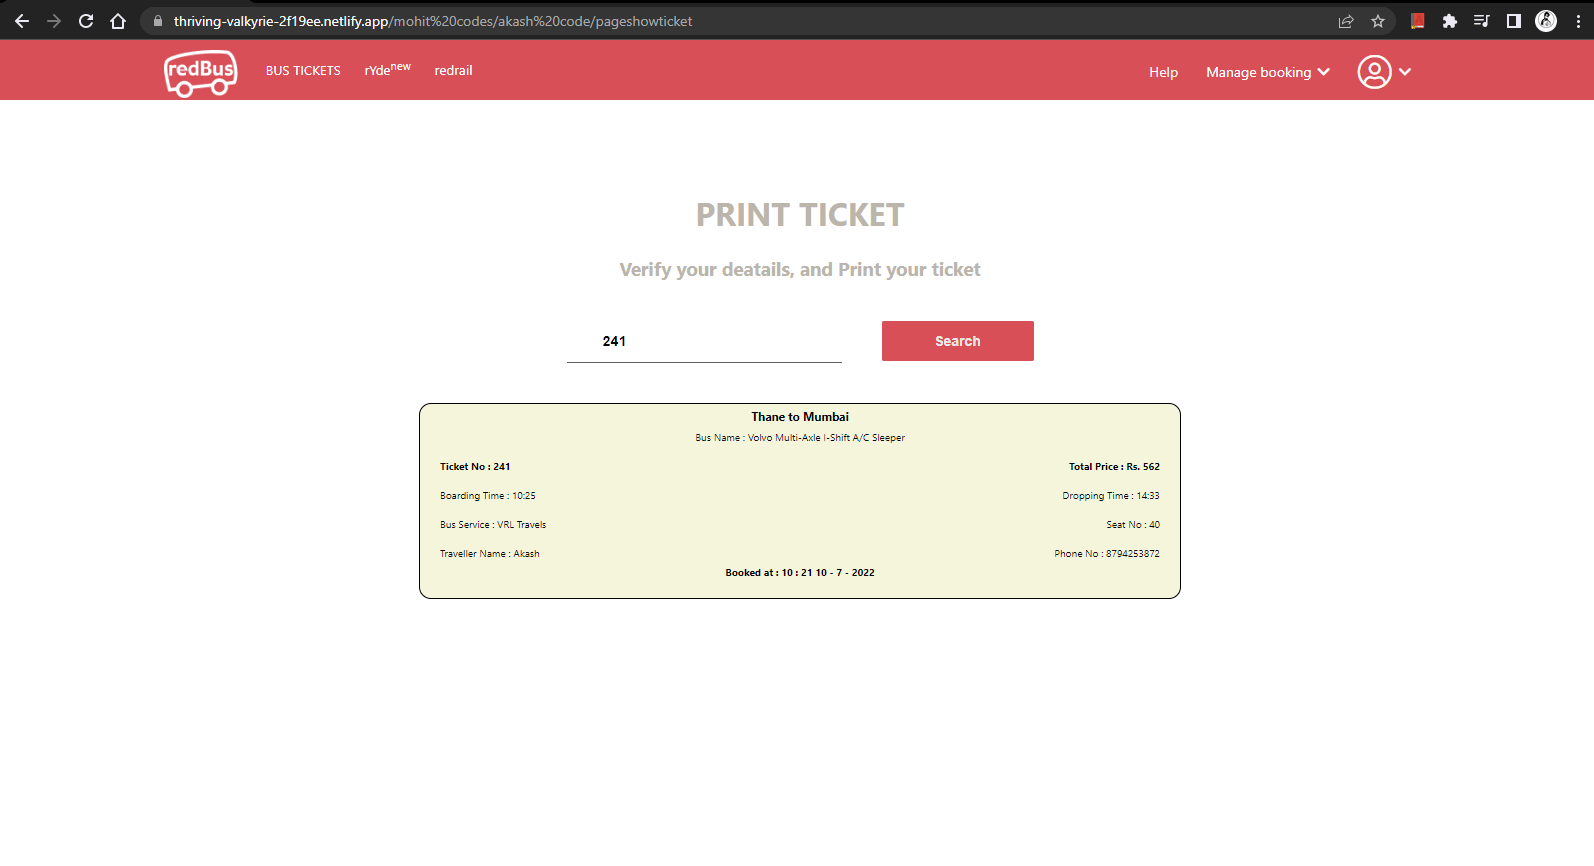 After-ShowTicket=2022-08-10 10 30 01.gif